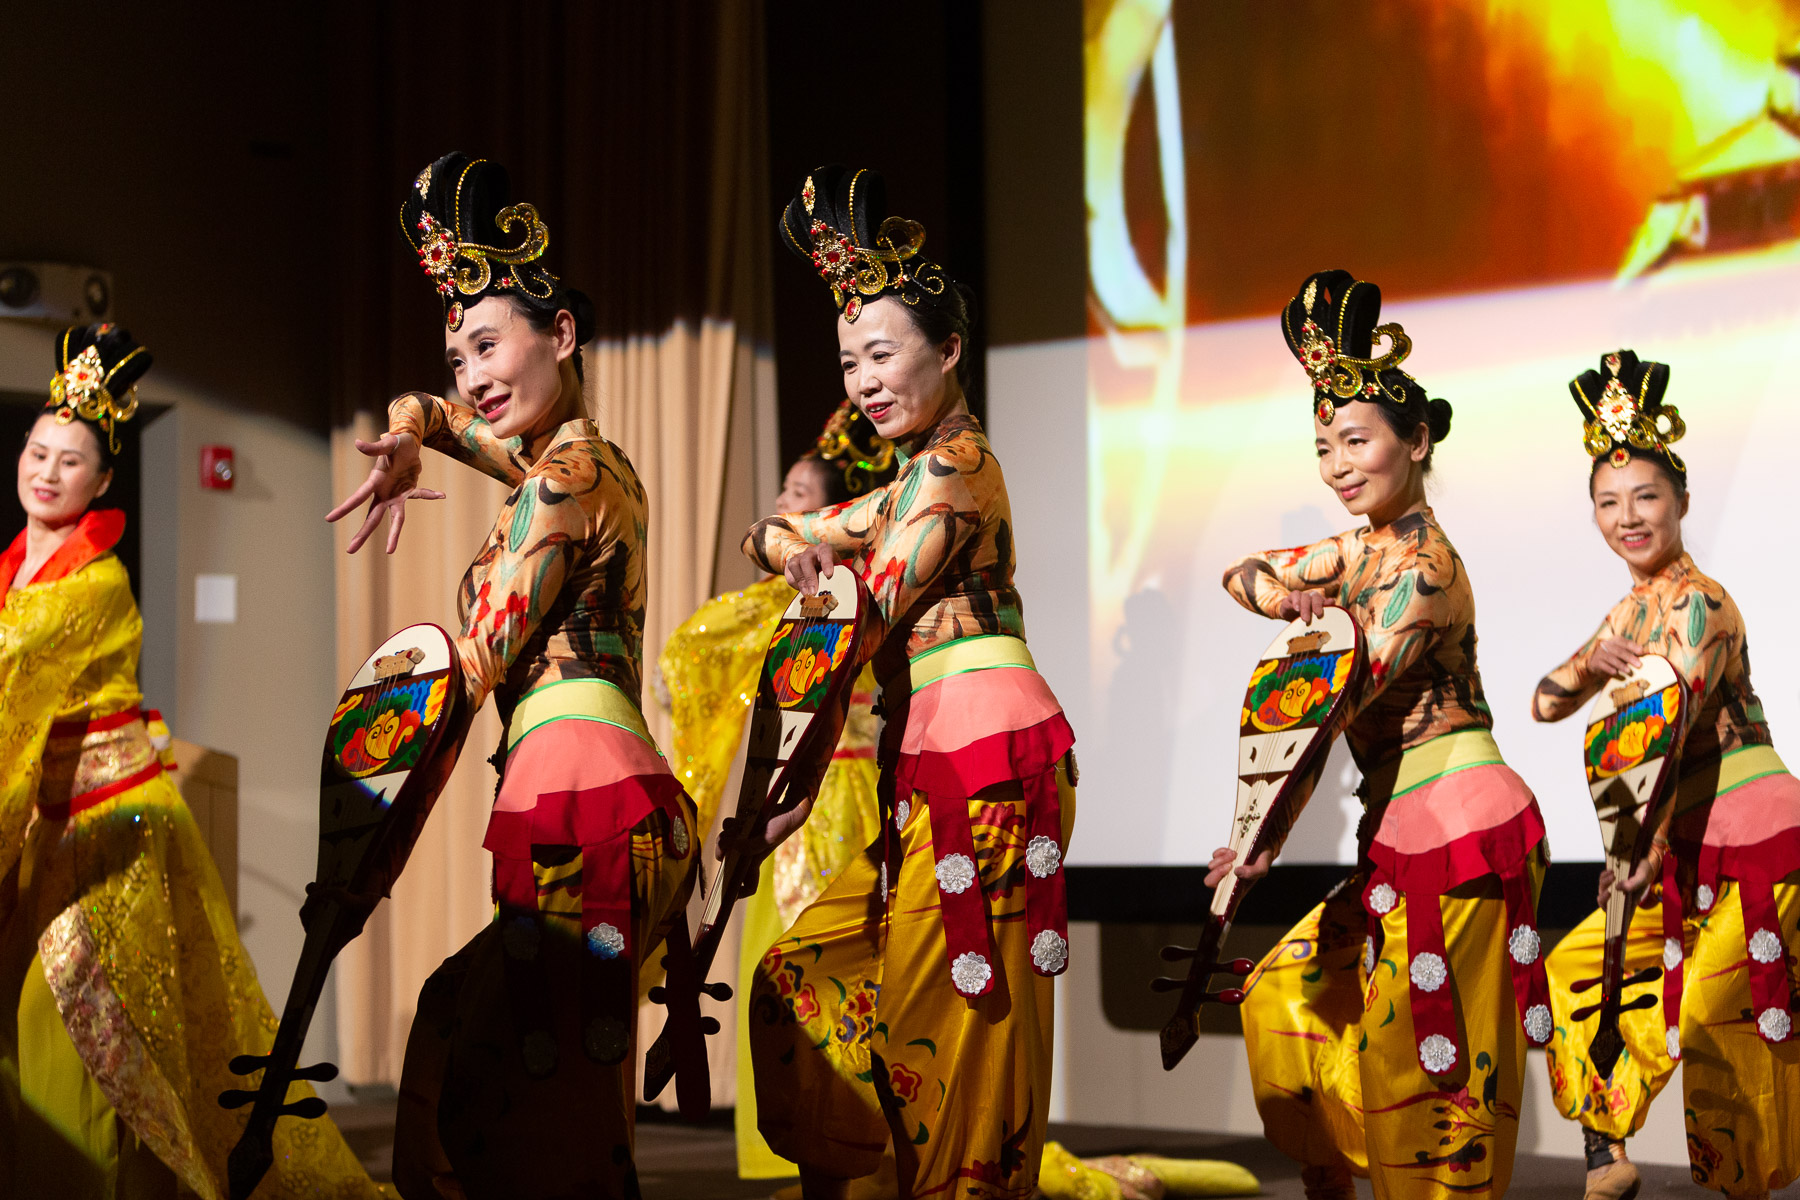 Members of the Hao Dance Chinese dance studio perform their routine entitled “A Thousand-Year Promise,” while dressed in traditional Chinese costumes. (DePaul University/Randall Spriggs)